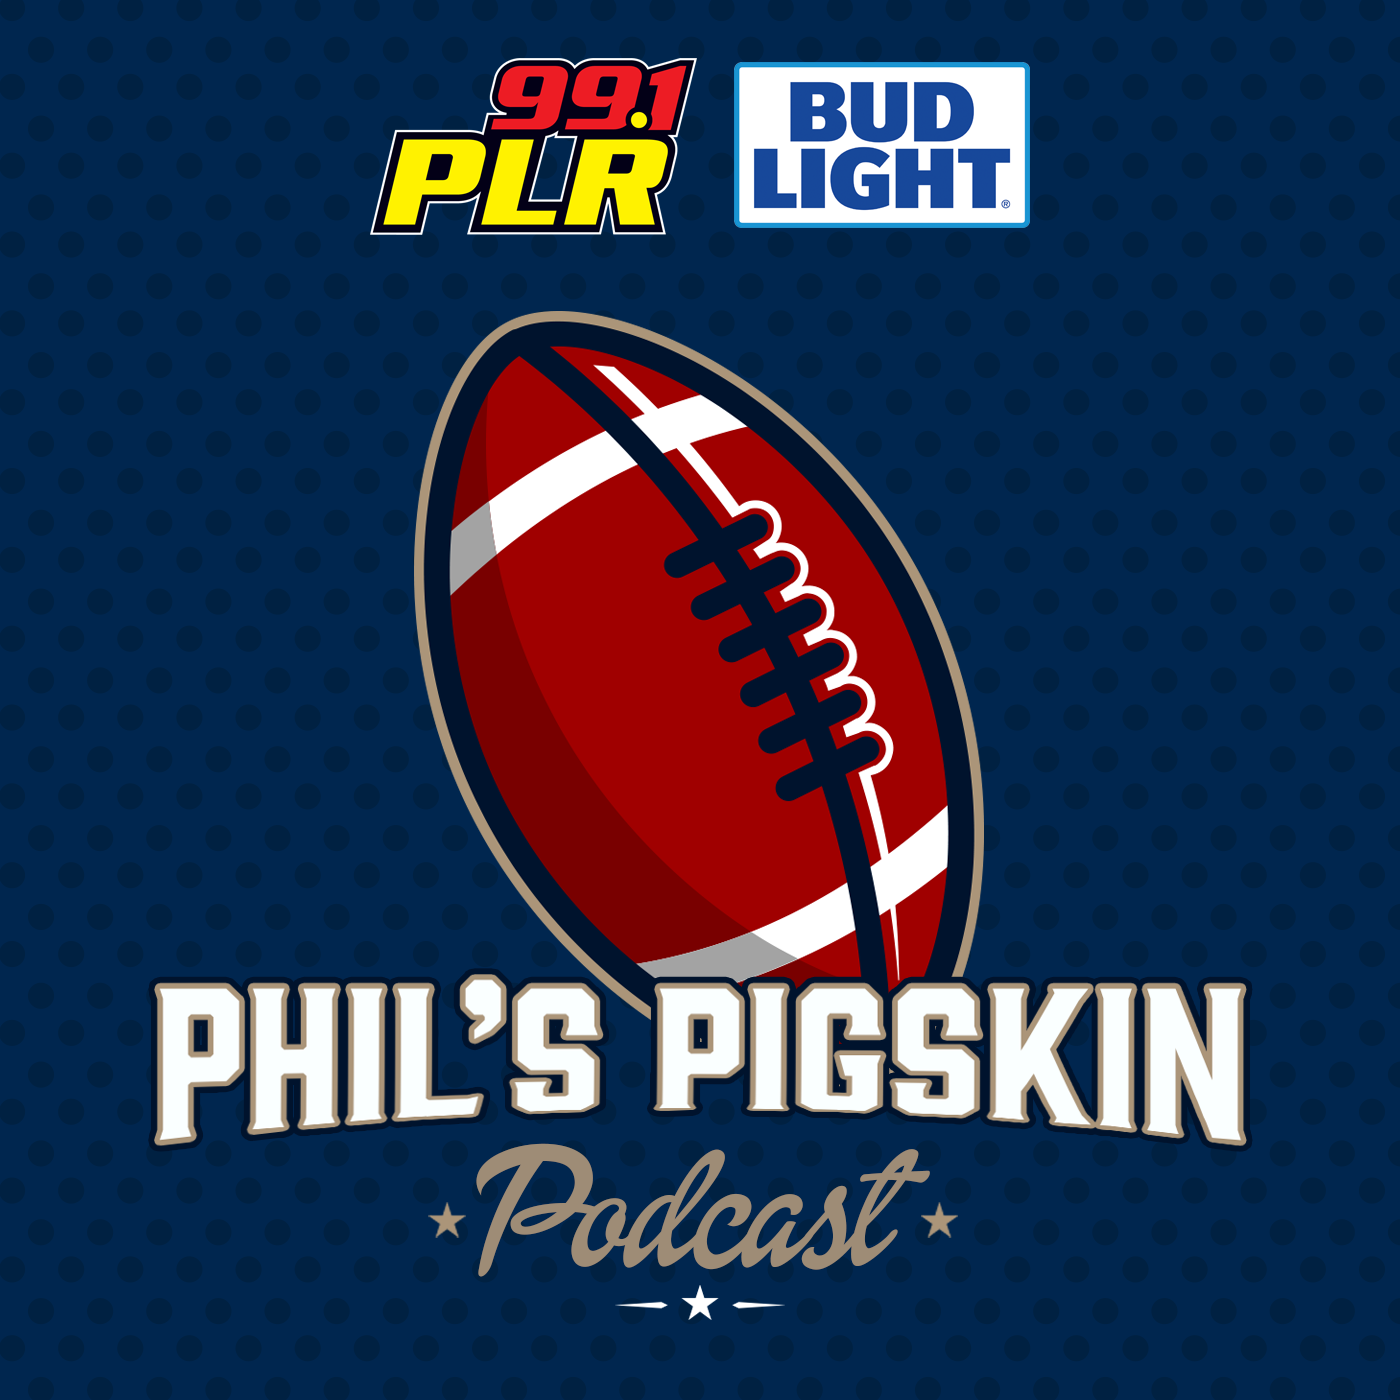 Phil’s Pigskin Podcast – The Patriots Are Still the Patriots